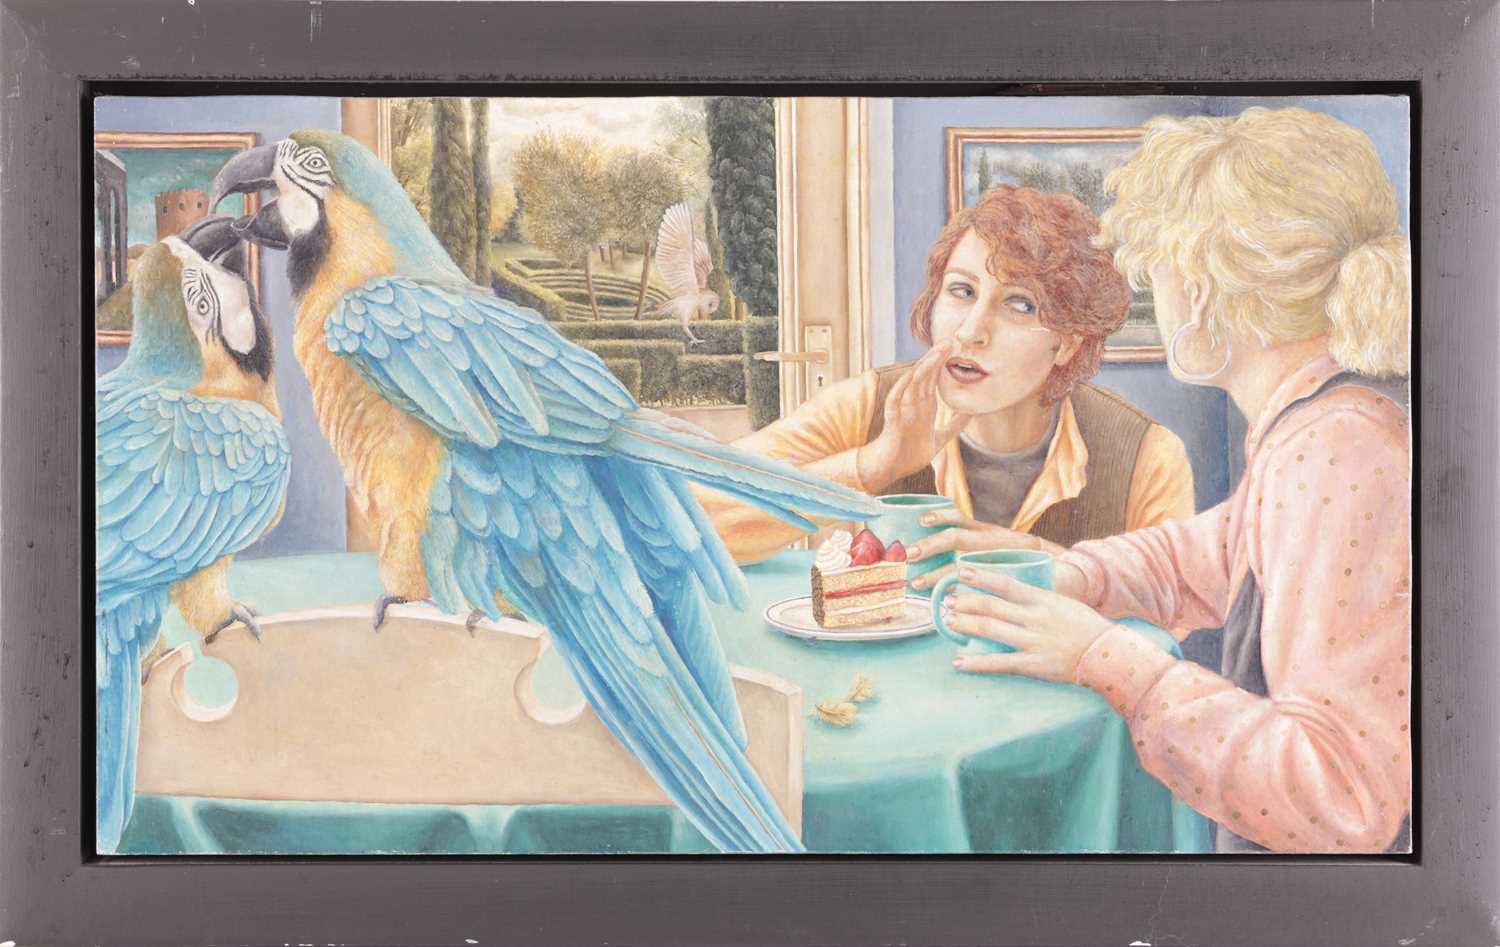 Sally Moore (b.1962), 'Birds of a Feather' (1994), labelled on the reverse, oil on panel, 30 x 52 cm - Image 2 of 12